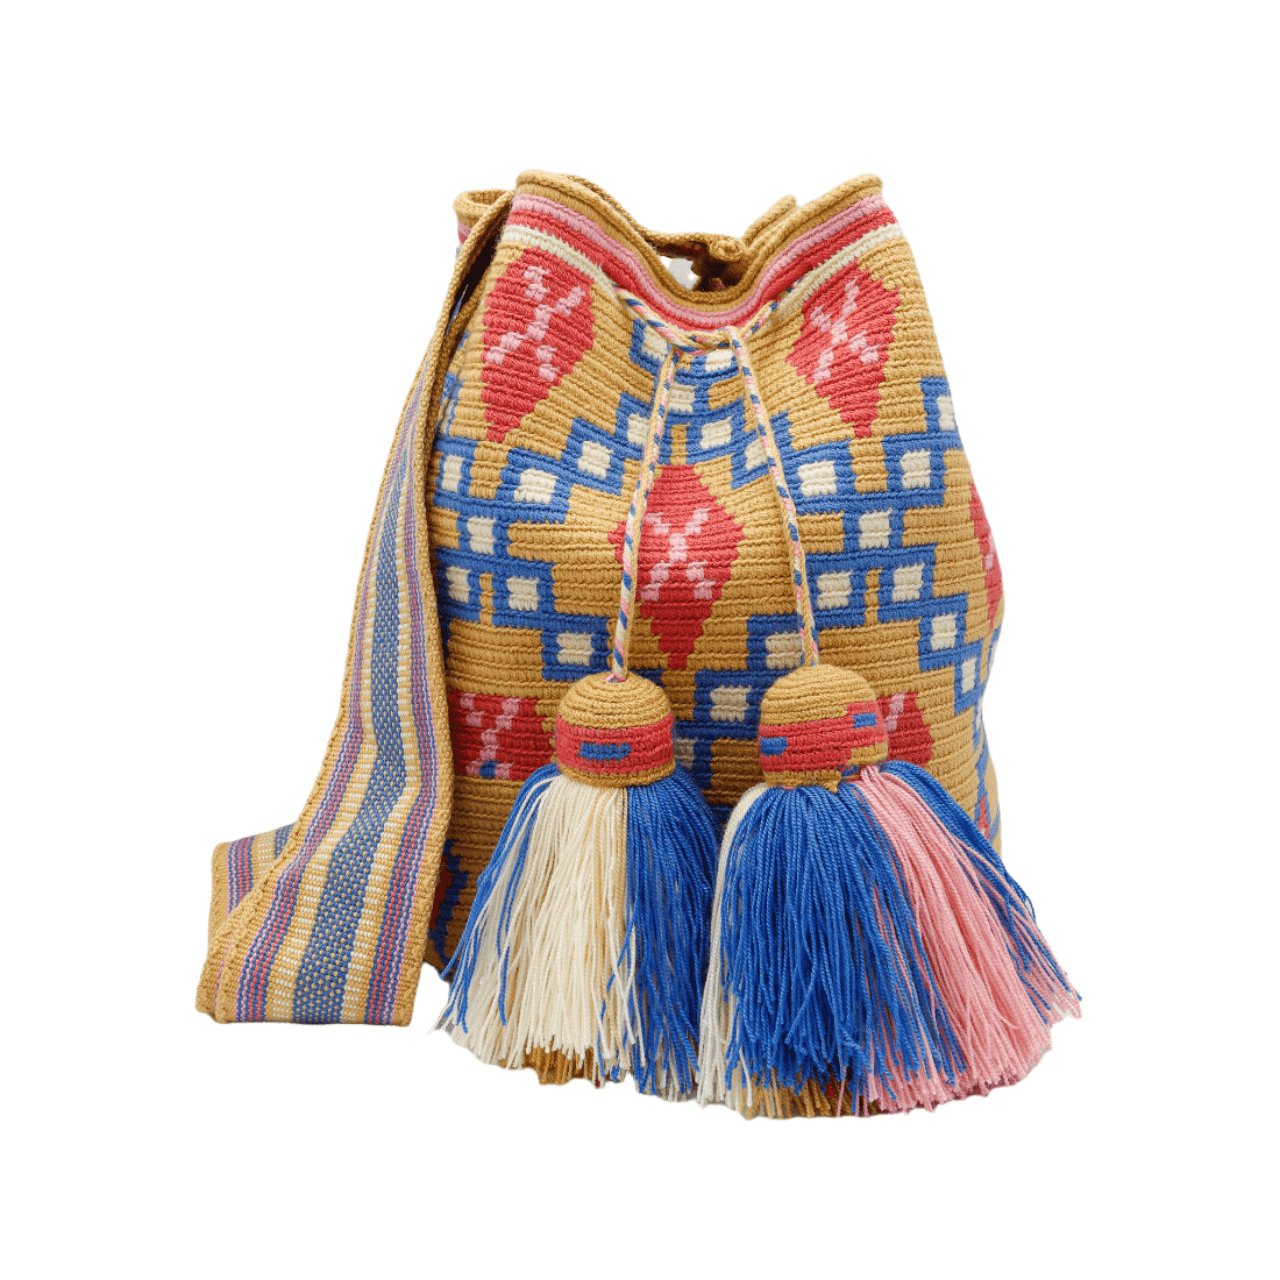 Mari Wayuu Bag in enchanting dark beige hue, featuring mesmerizing pink and blue patterns, handcrafted in Colombia, creating a truly distinct and eye-catching design.